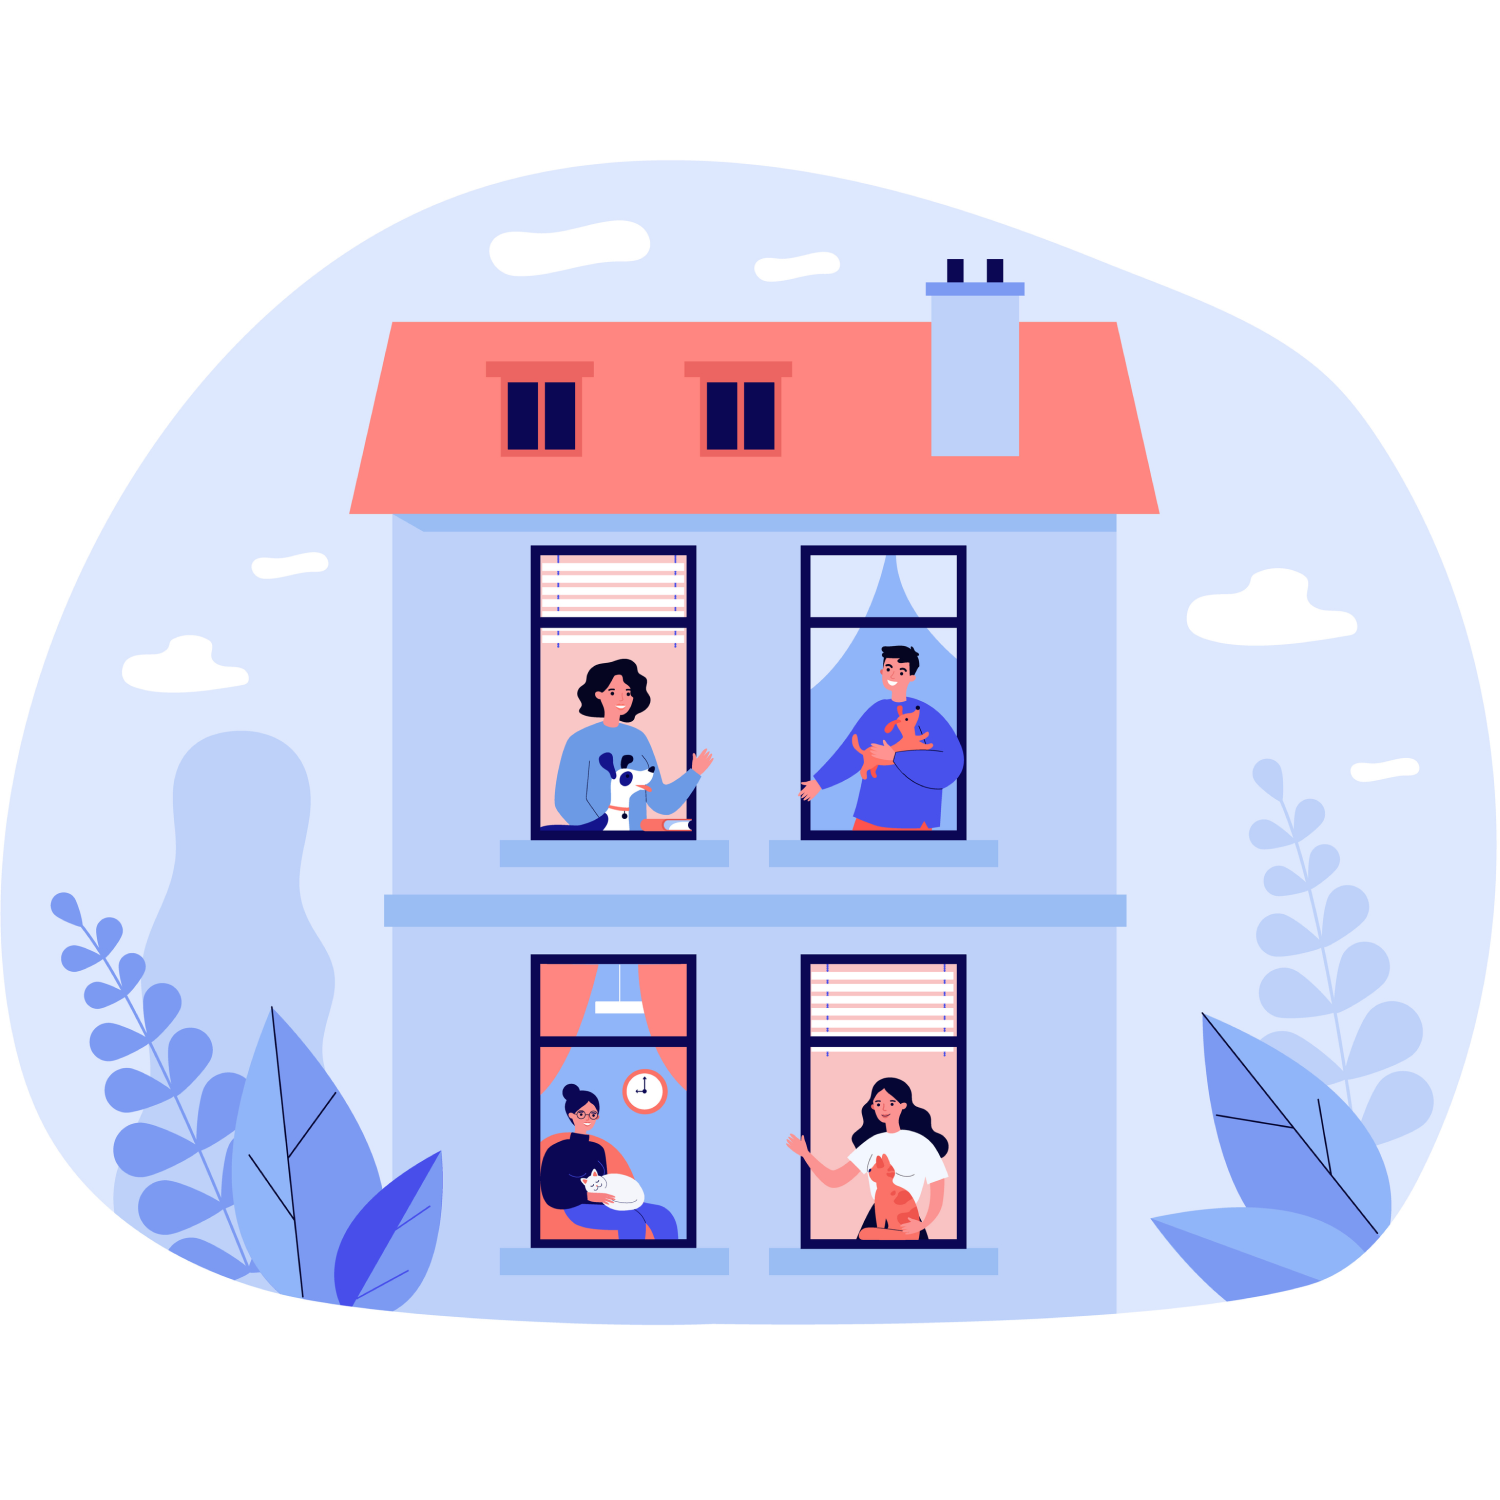 An illustration of people inside a home